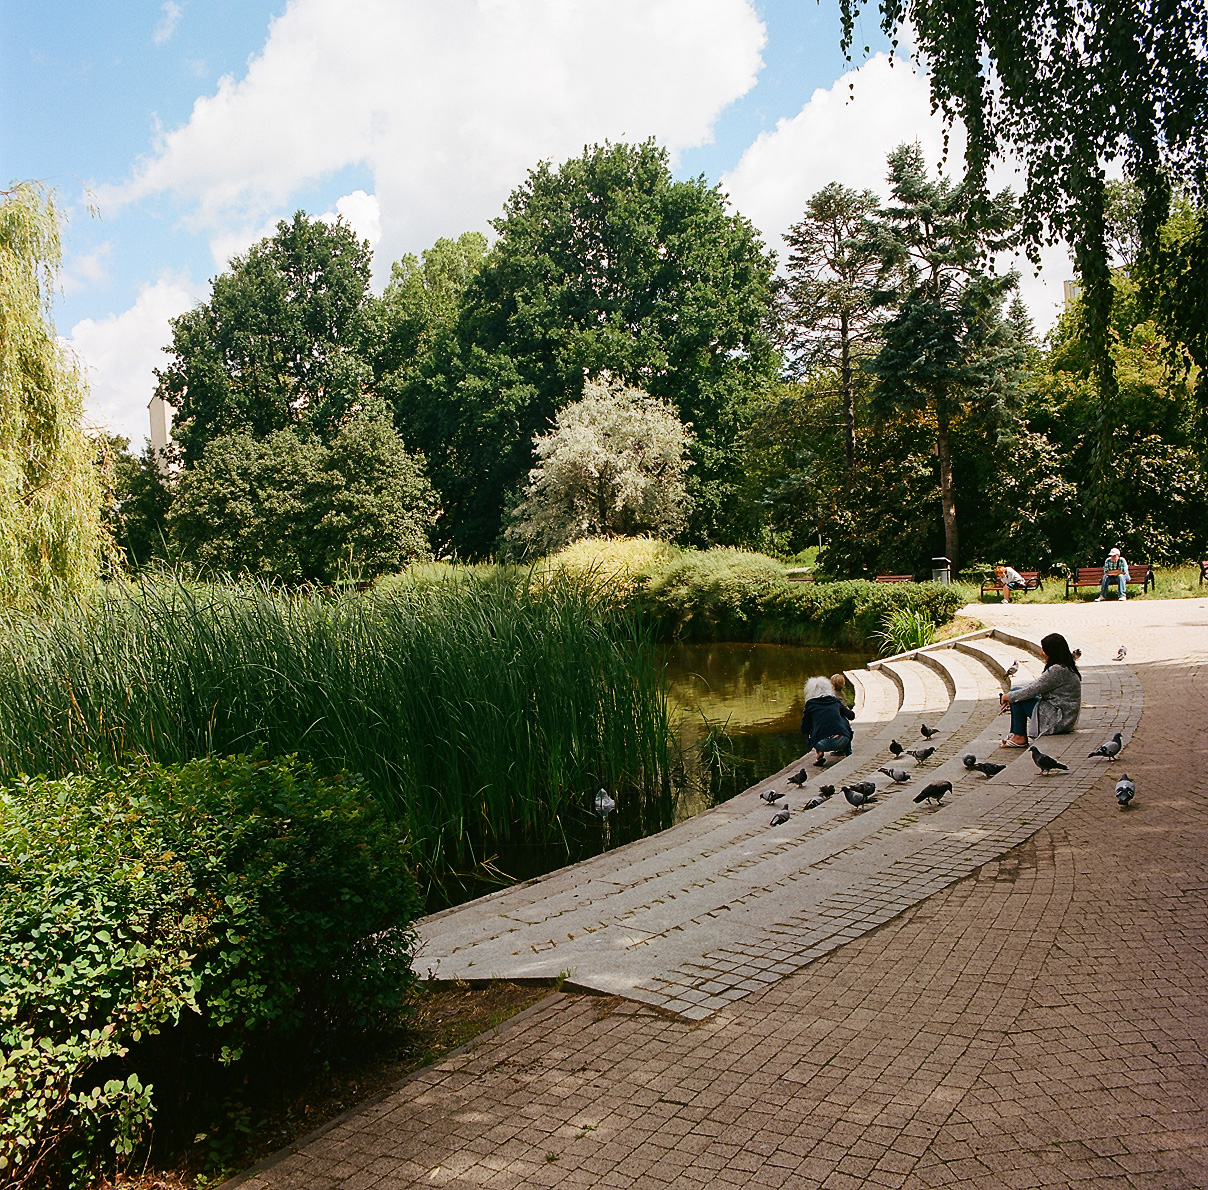 Pond on the Rakowiec housing estate, a former clay pit around which the functionalist cooperative blocks were built in the 1930s. The pond is in good health, has a well-maintained architectural setting, requires lily replanting in underwater containers.